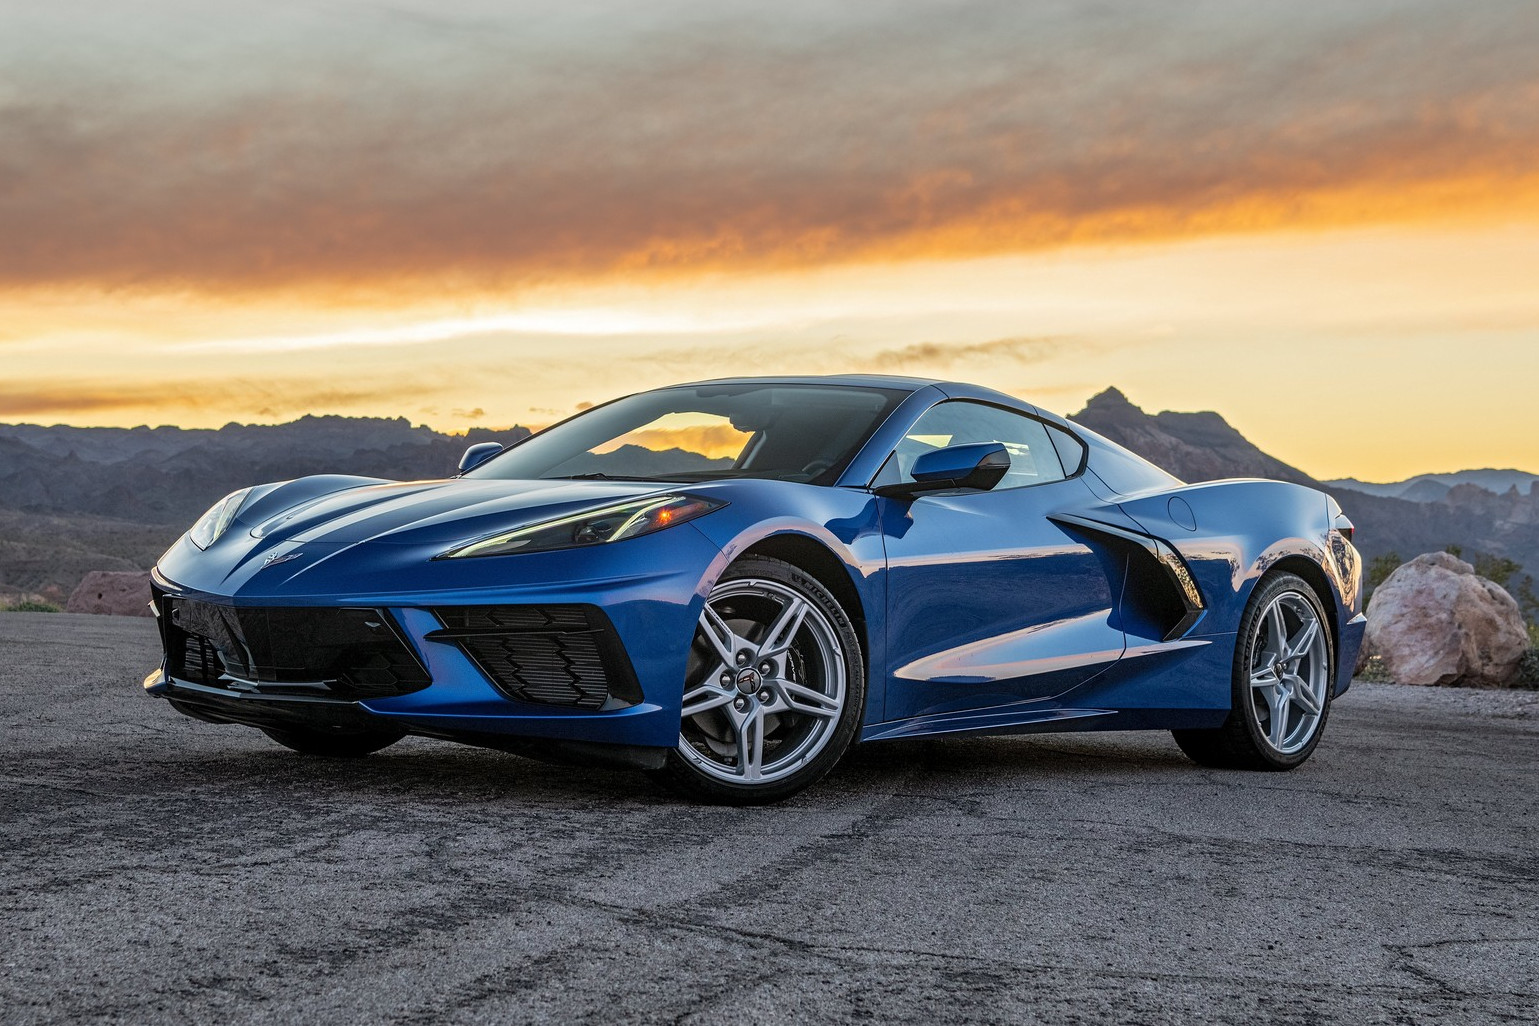 Corvette Leads, Lexus IS Takes Two Spots In February's Top 20 Fastest